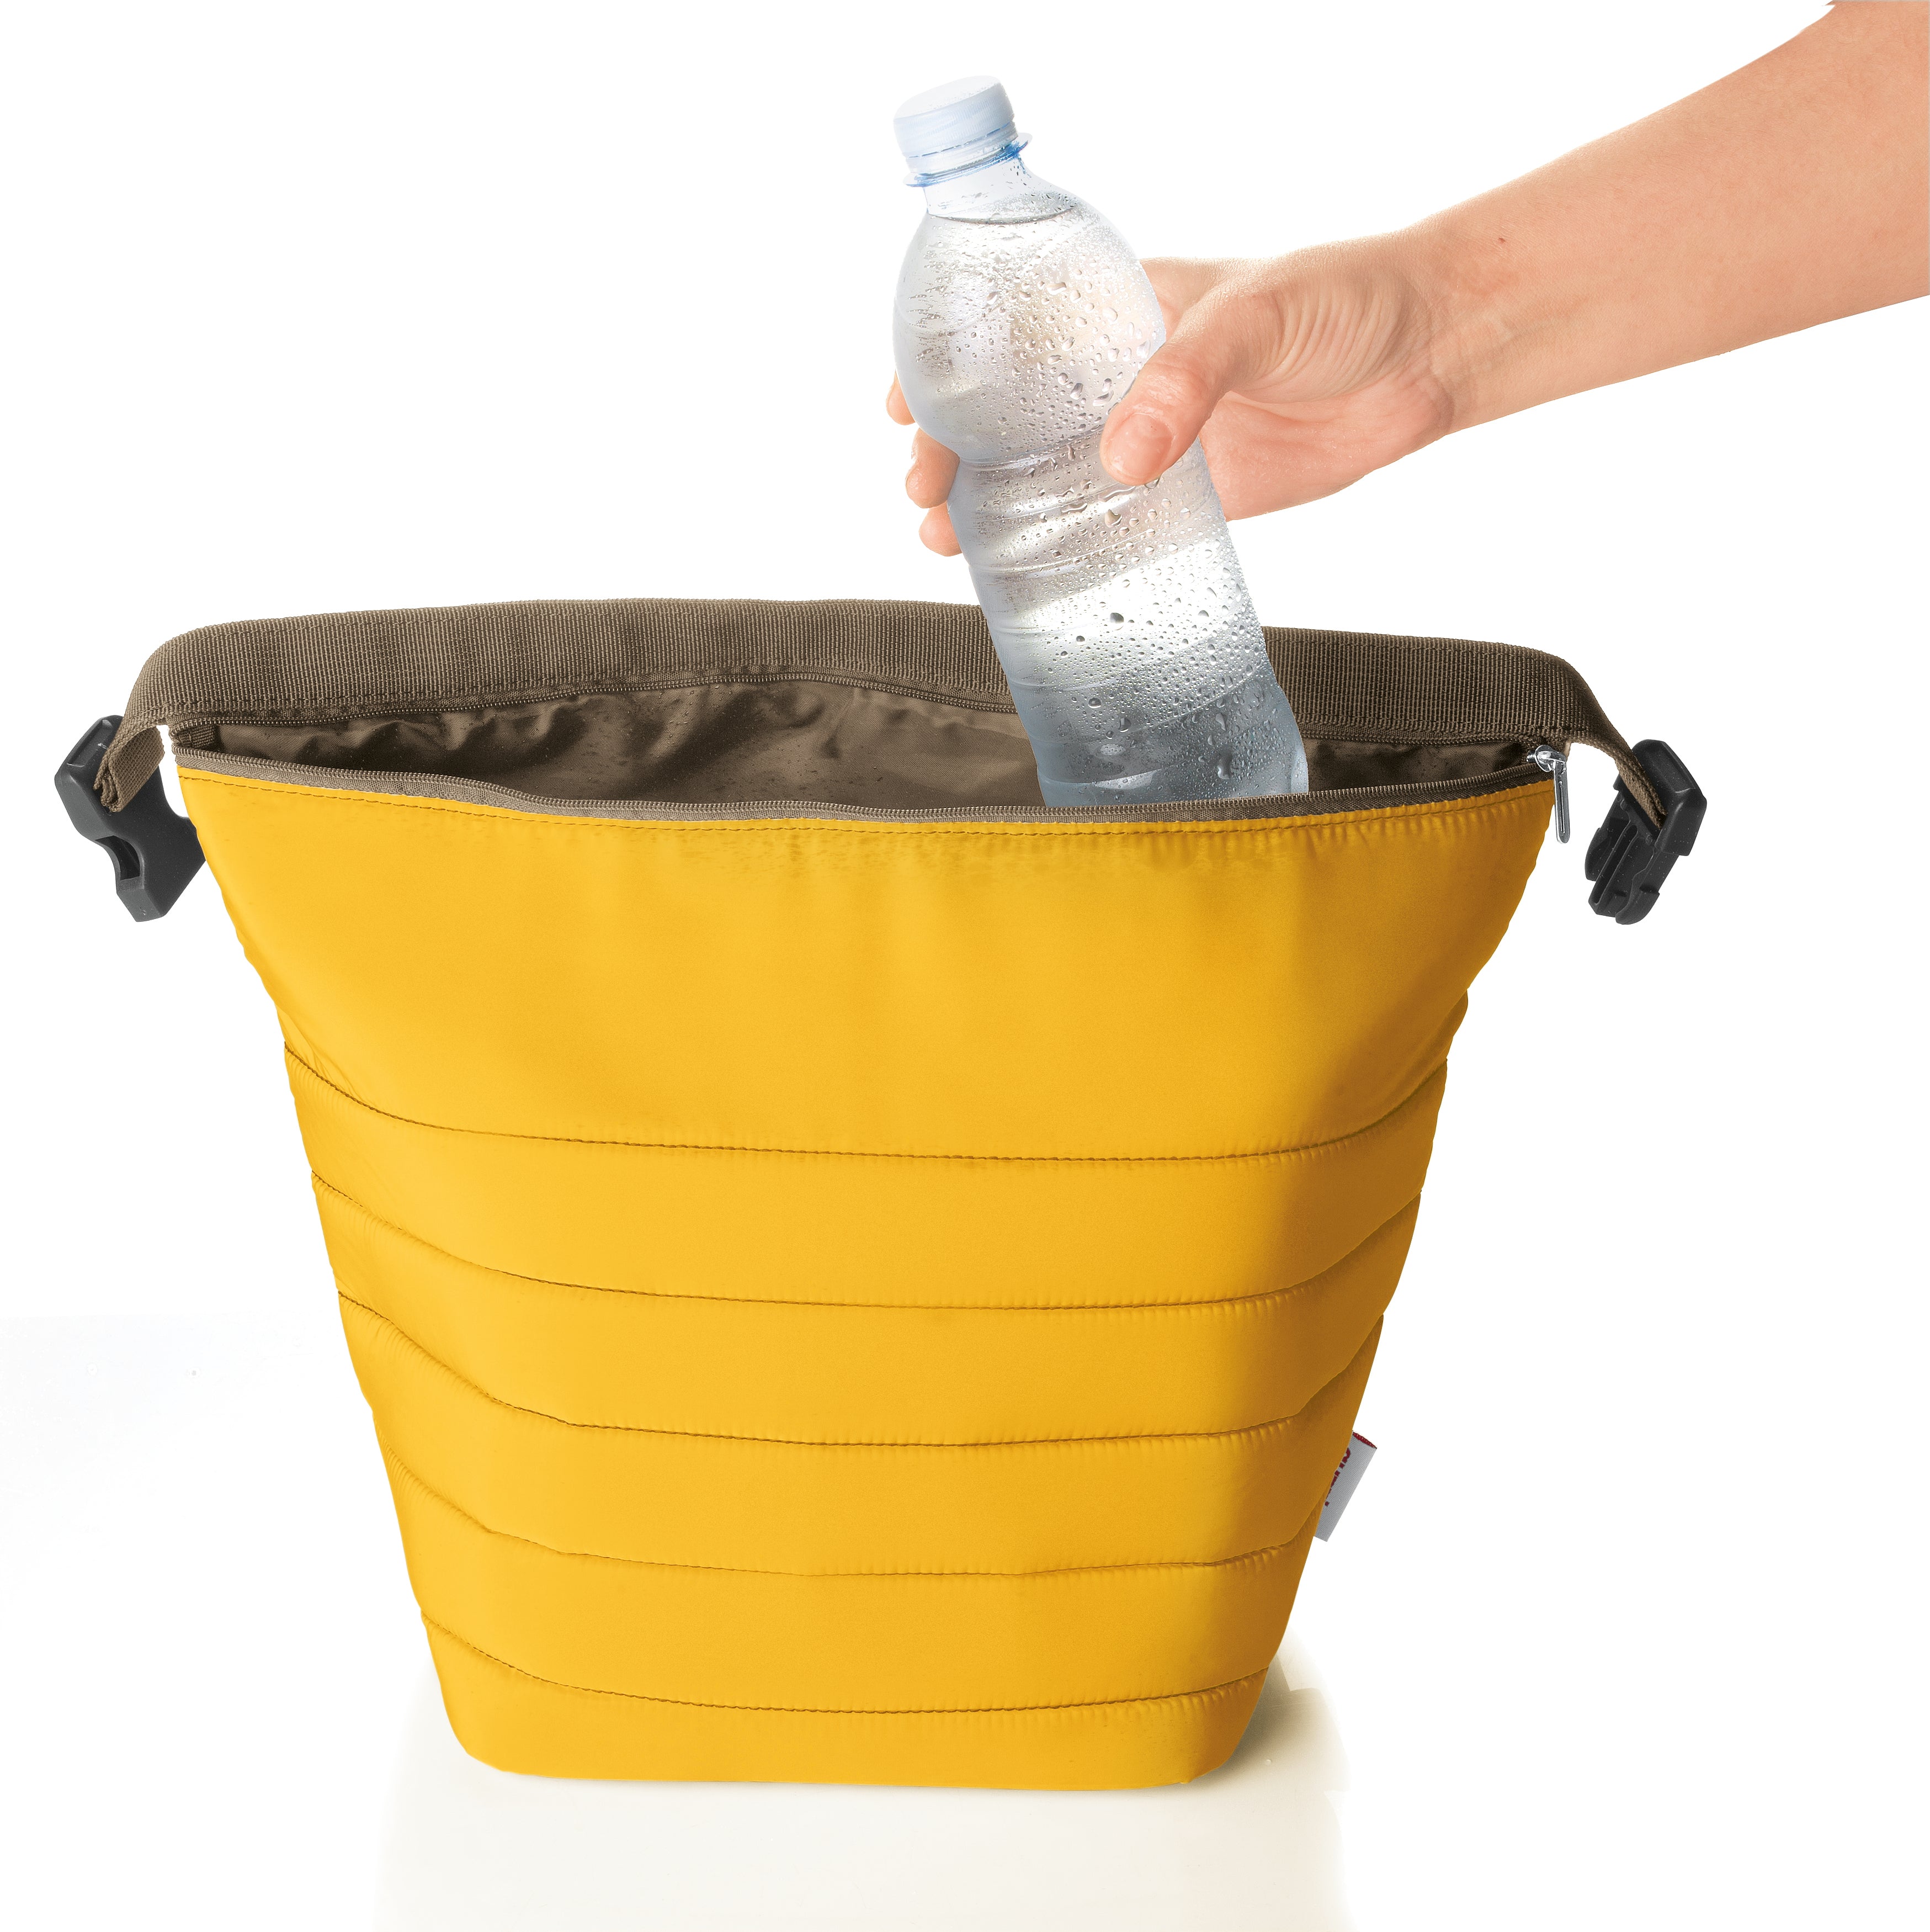 THERMAL BAG WITH AIRTIGHT CONTAINER 'HANDY' "ON THE GO"